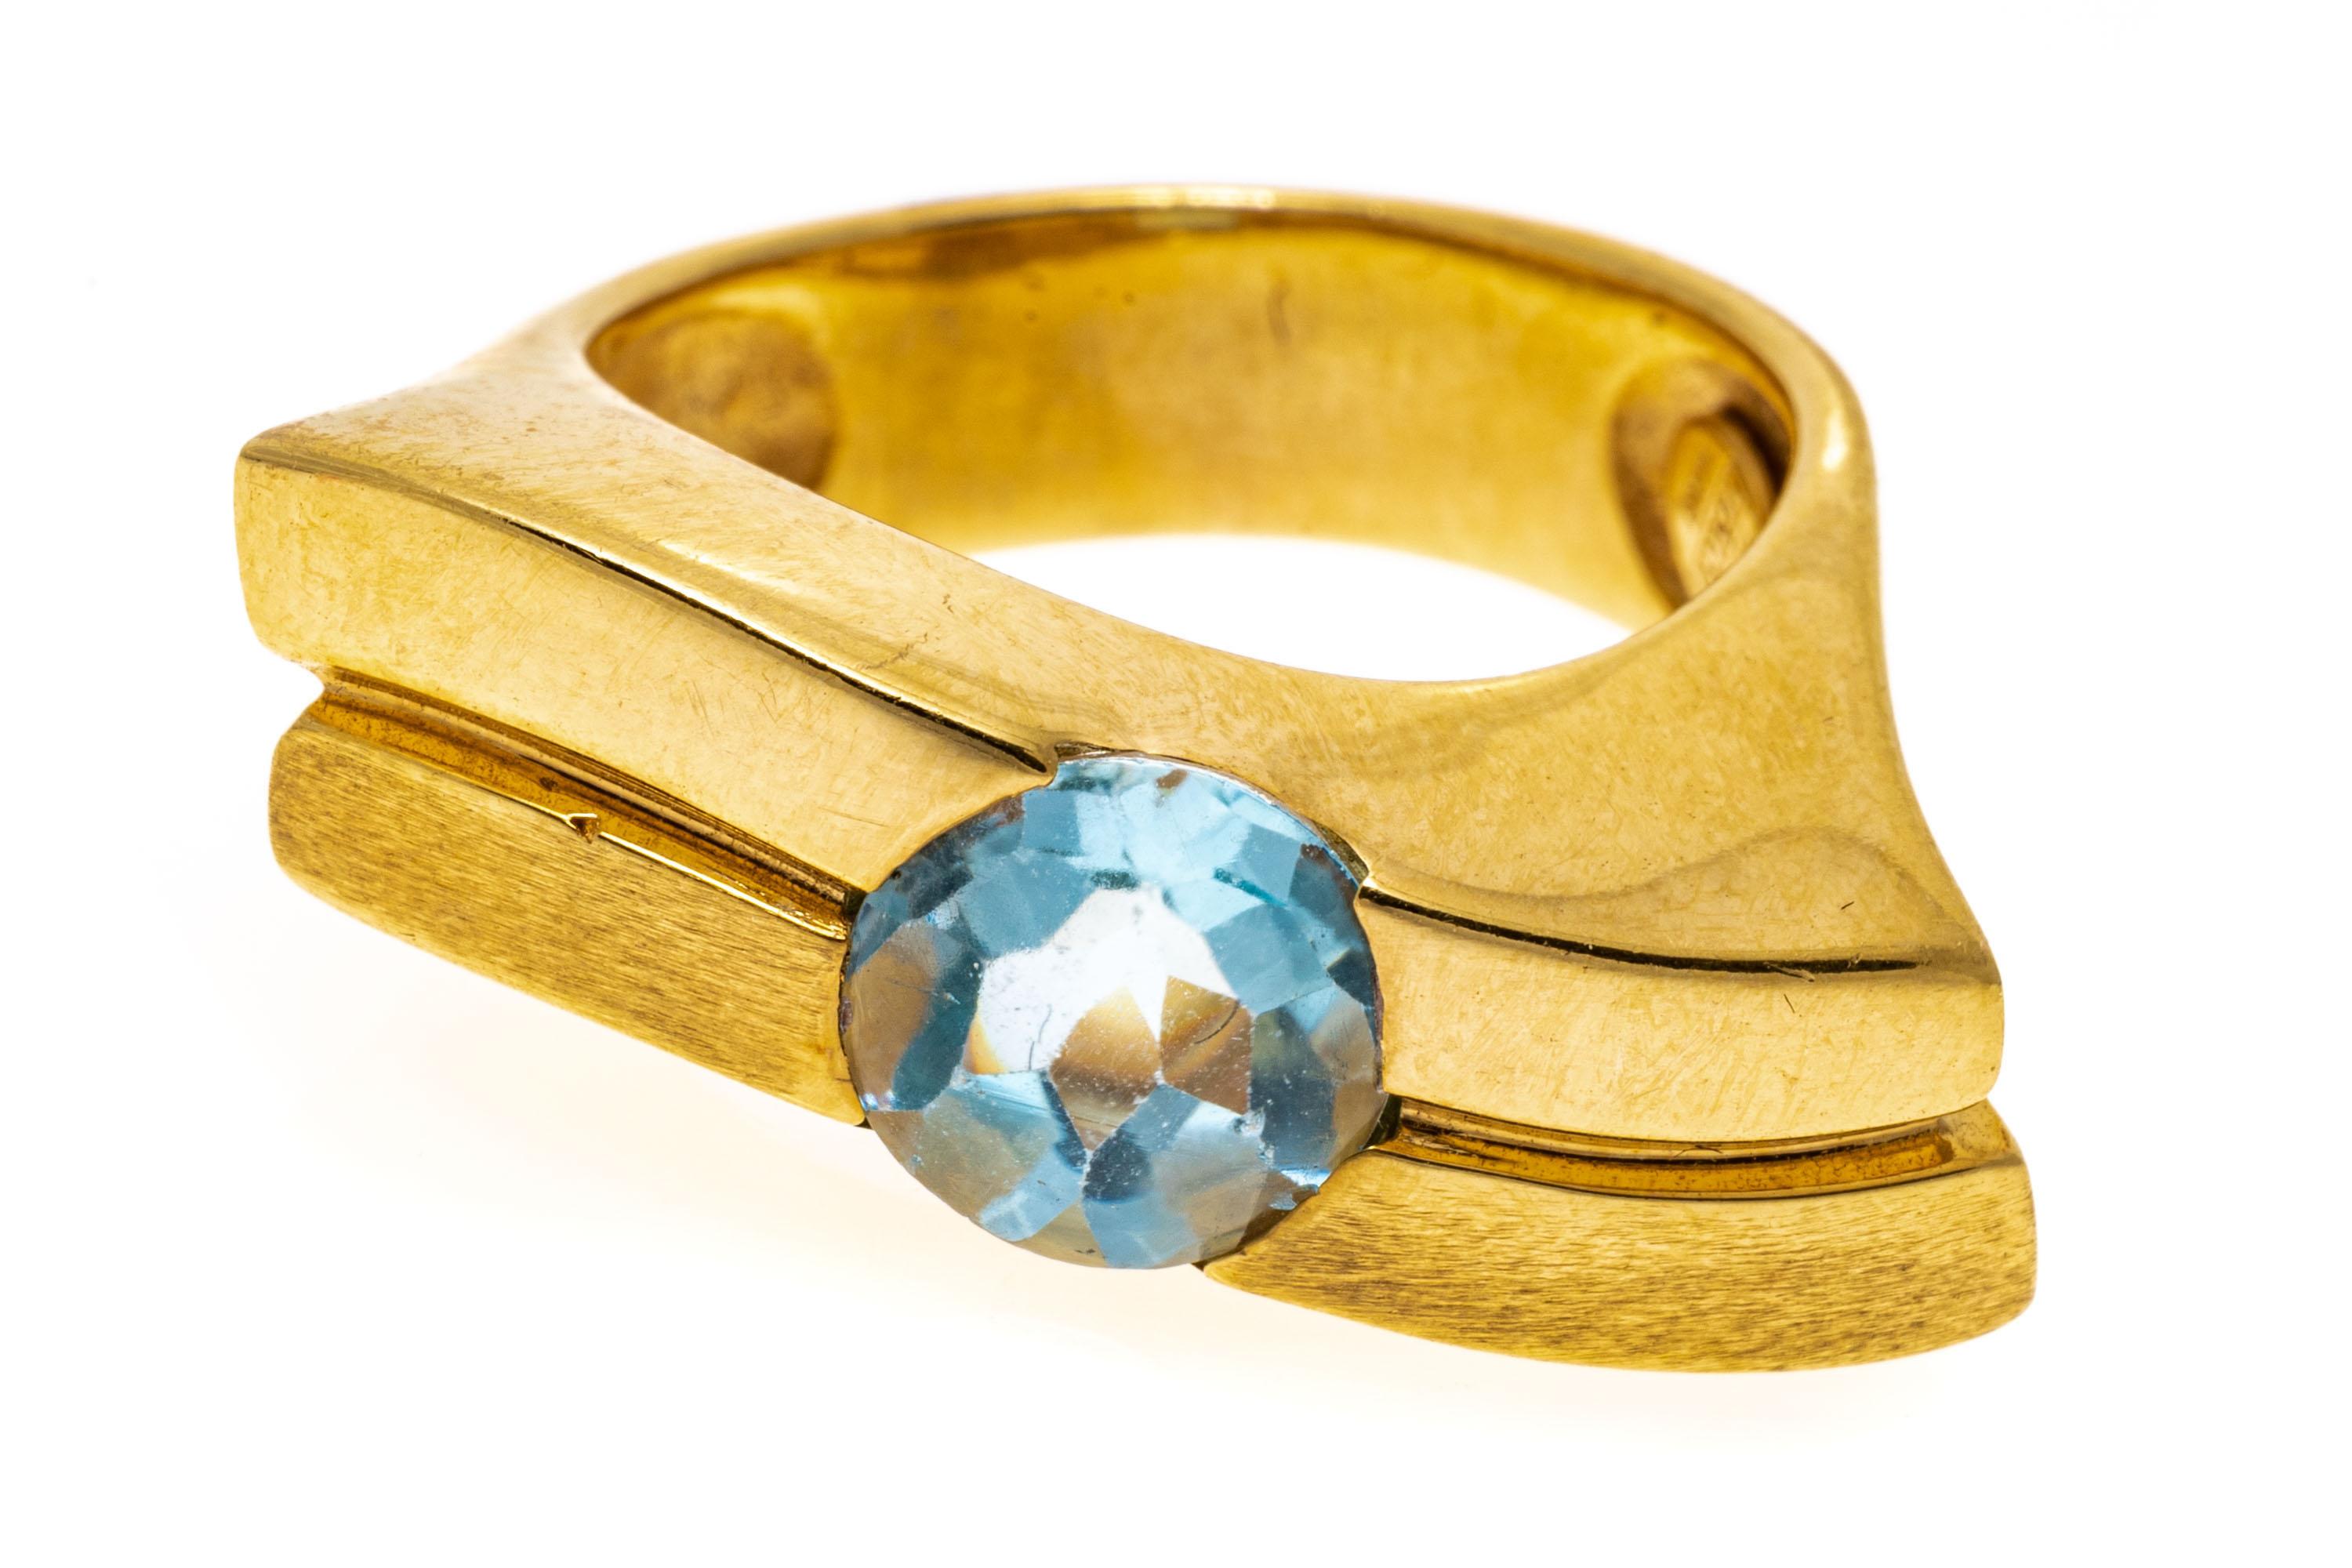 14k yellow gold ring. This unusual ring has a round, half faceted and half cabachon cut, light blue color blue topaz, center flush set into a wide, elongated contemporary matte and high polished lined waved top, decorated with wide, split